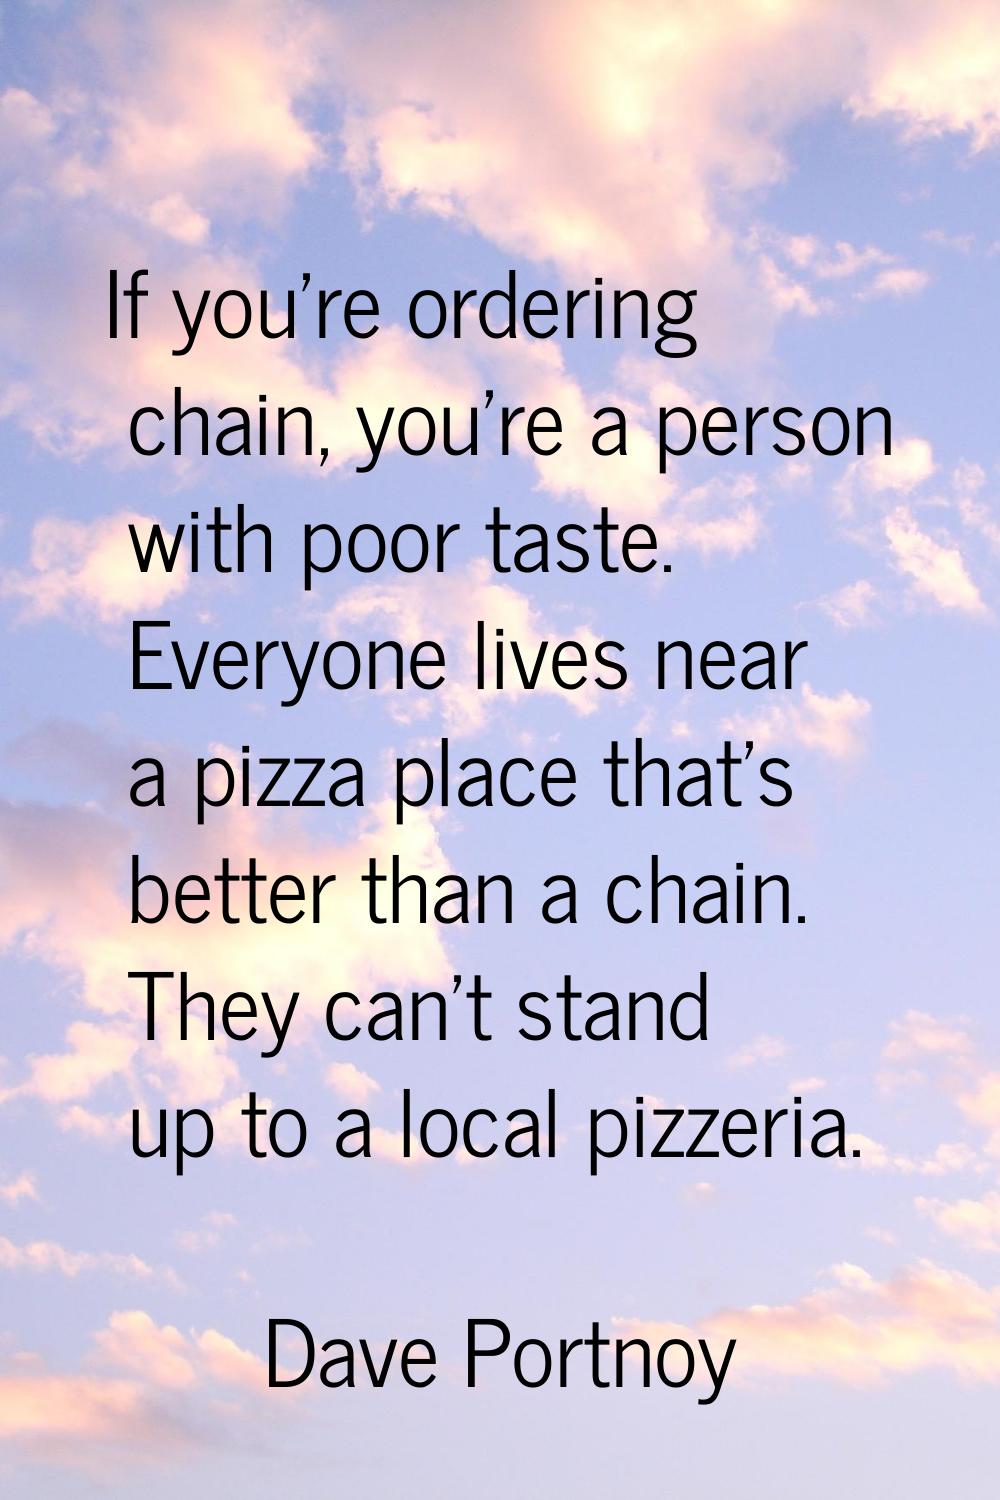 If you're ordering chain, you're a person with poor taste. Everyone lives near a pizza place that's